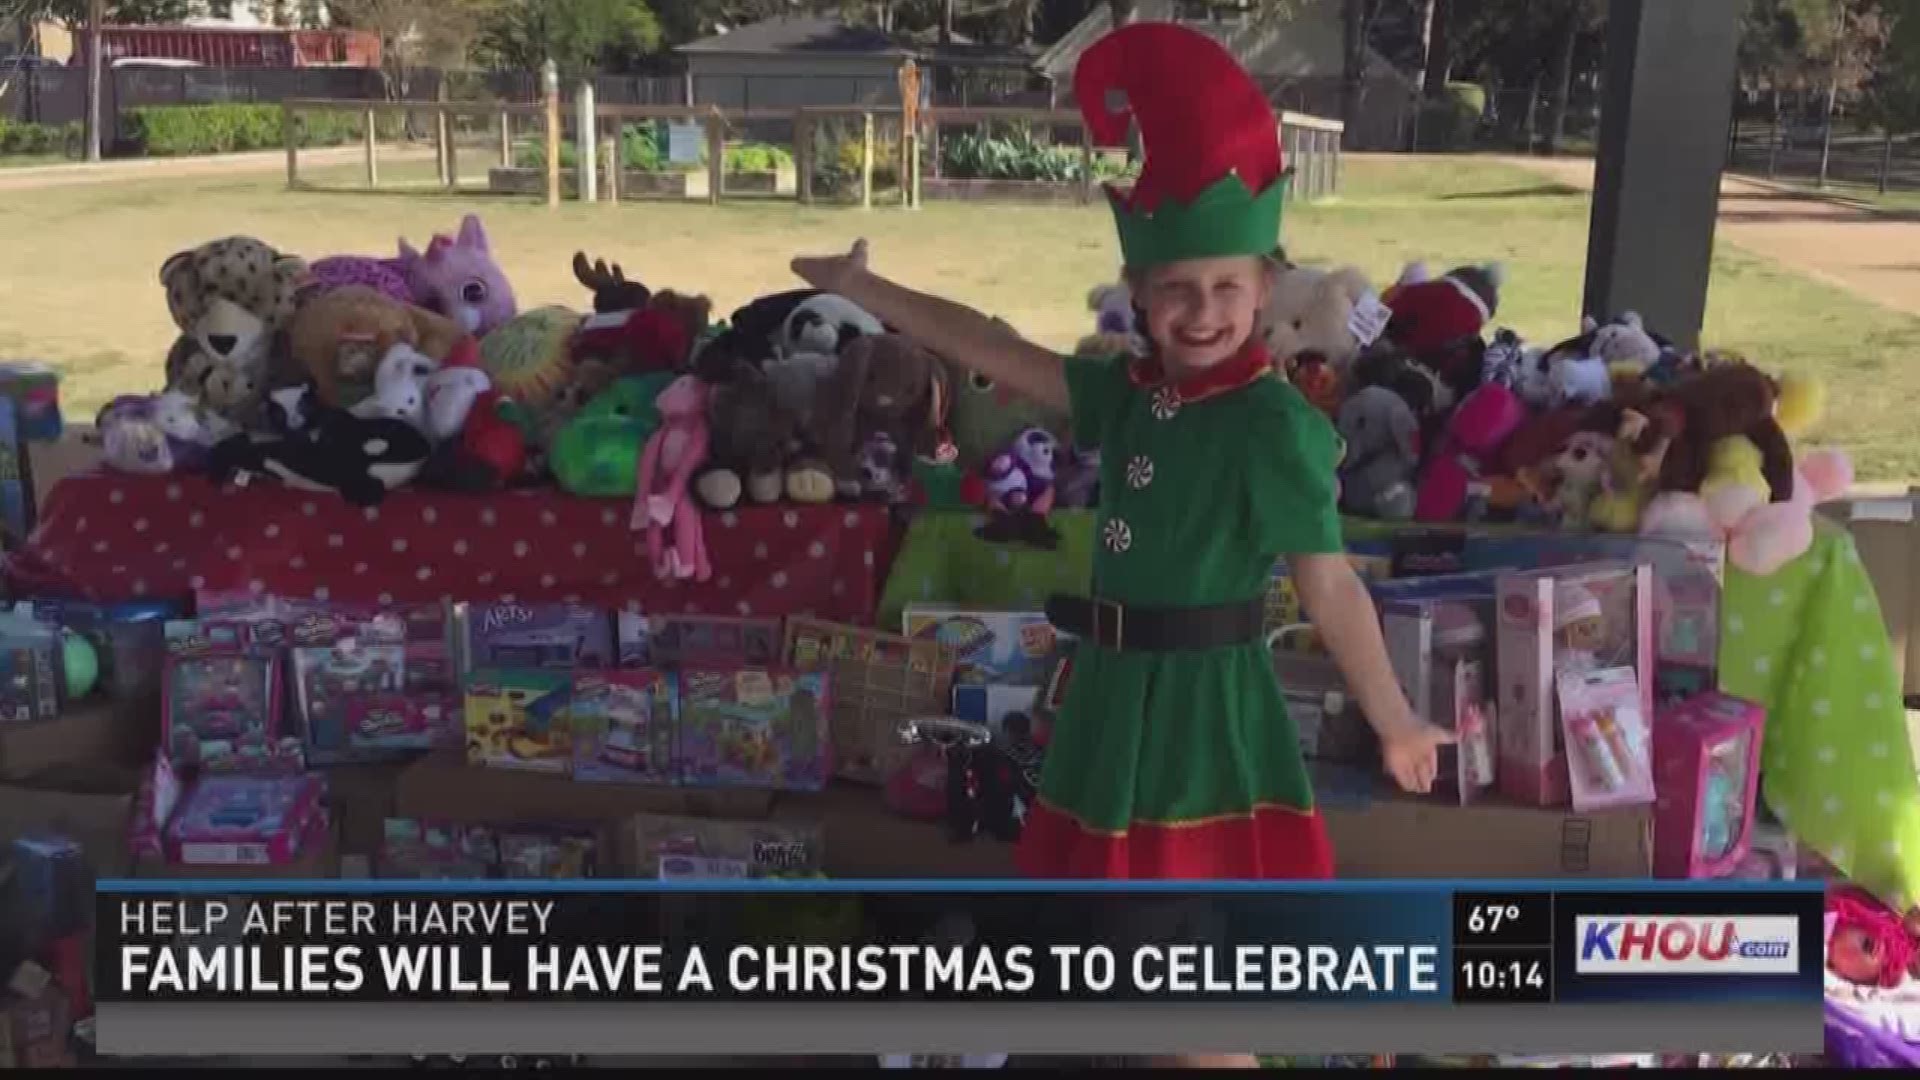 A Christmas toy drive was held in Houston for Hurricane Harvey victims on Sunday, giving hope to families who lost so much in the storm. 